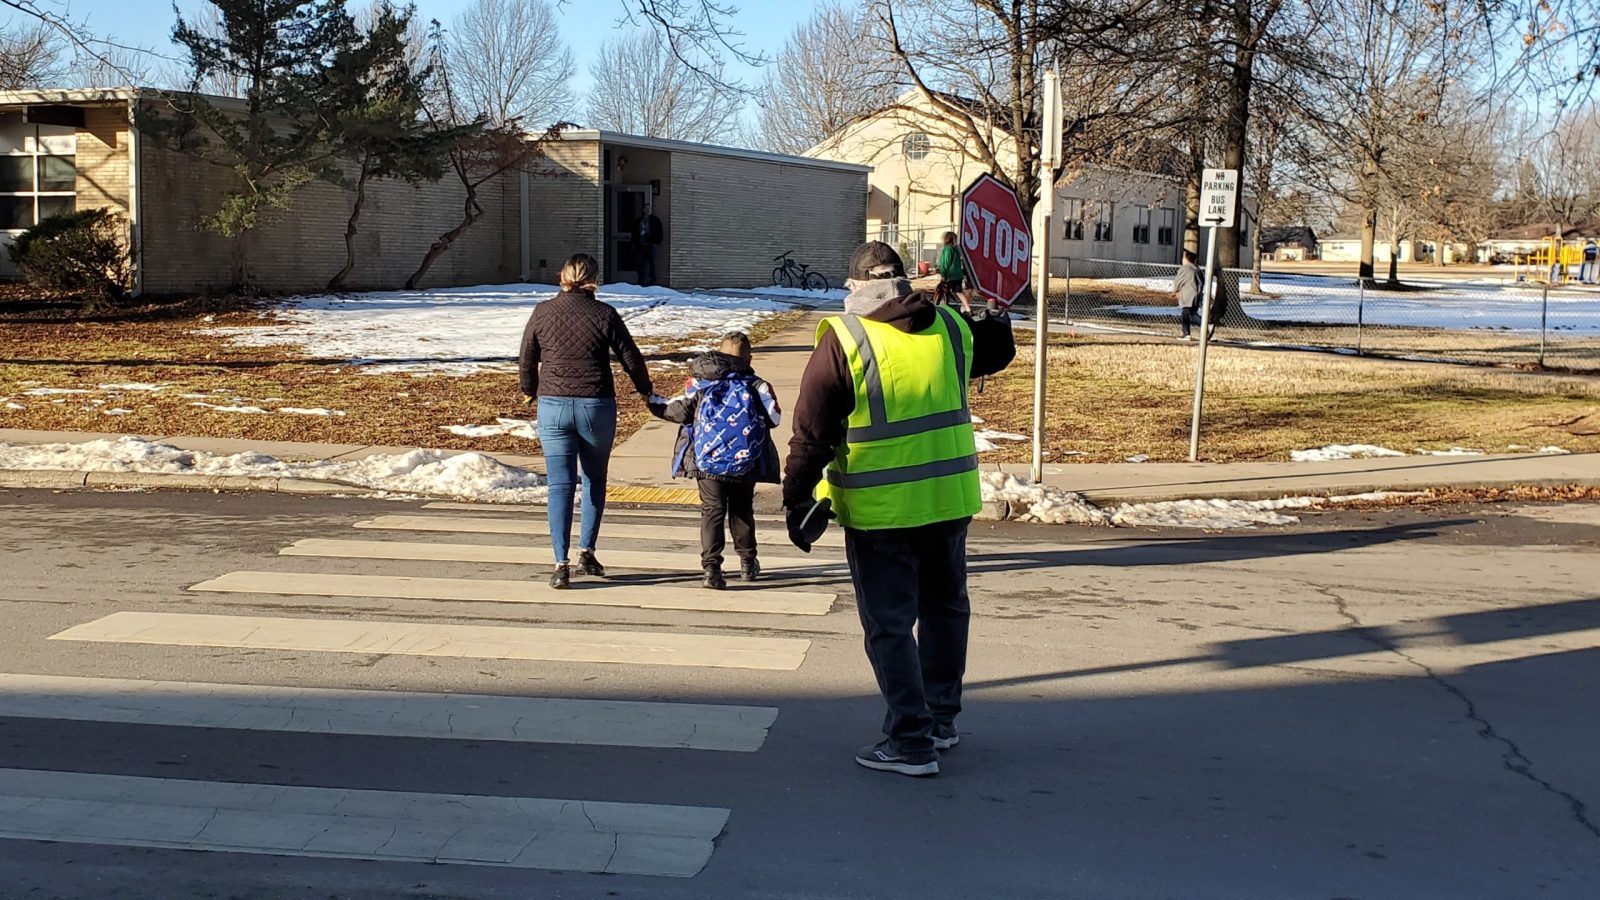 A mother escorts her child across a street as a crossing guard holds a stop sign